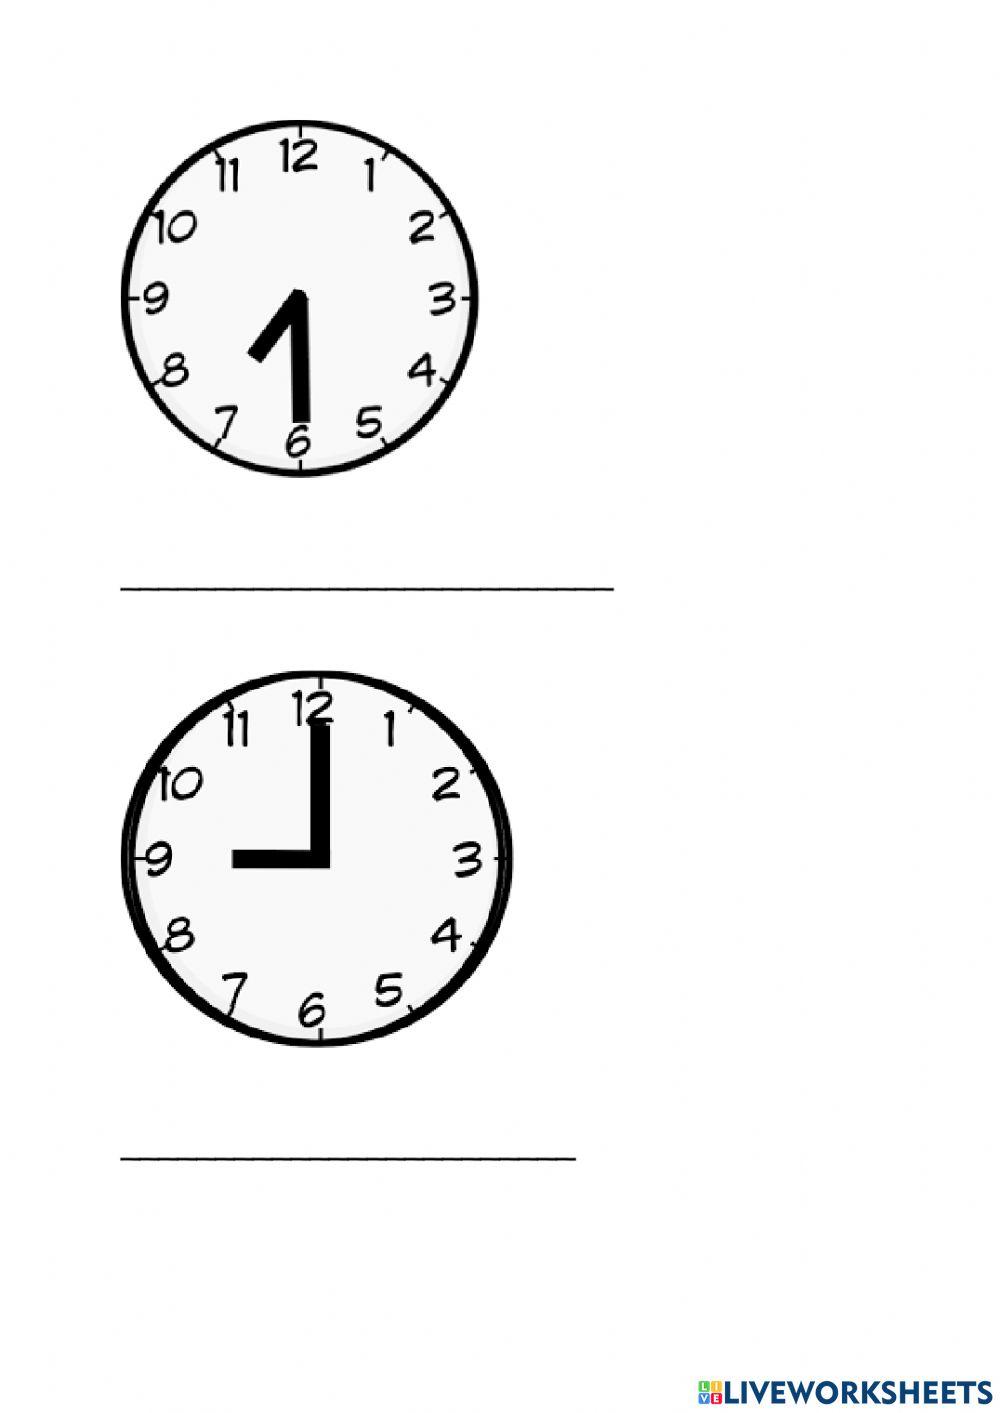 Difference between Hour and Half Past